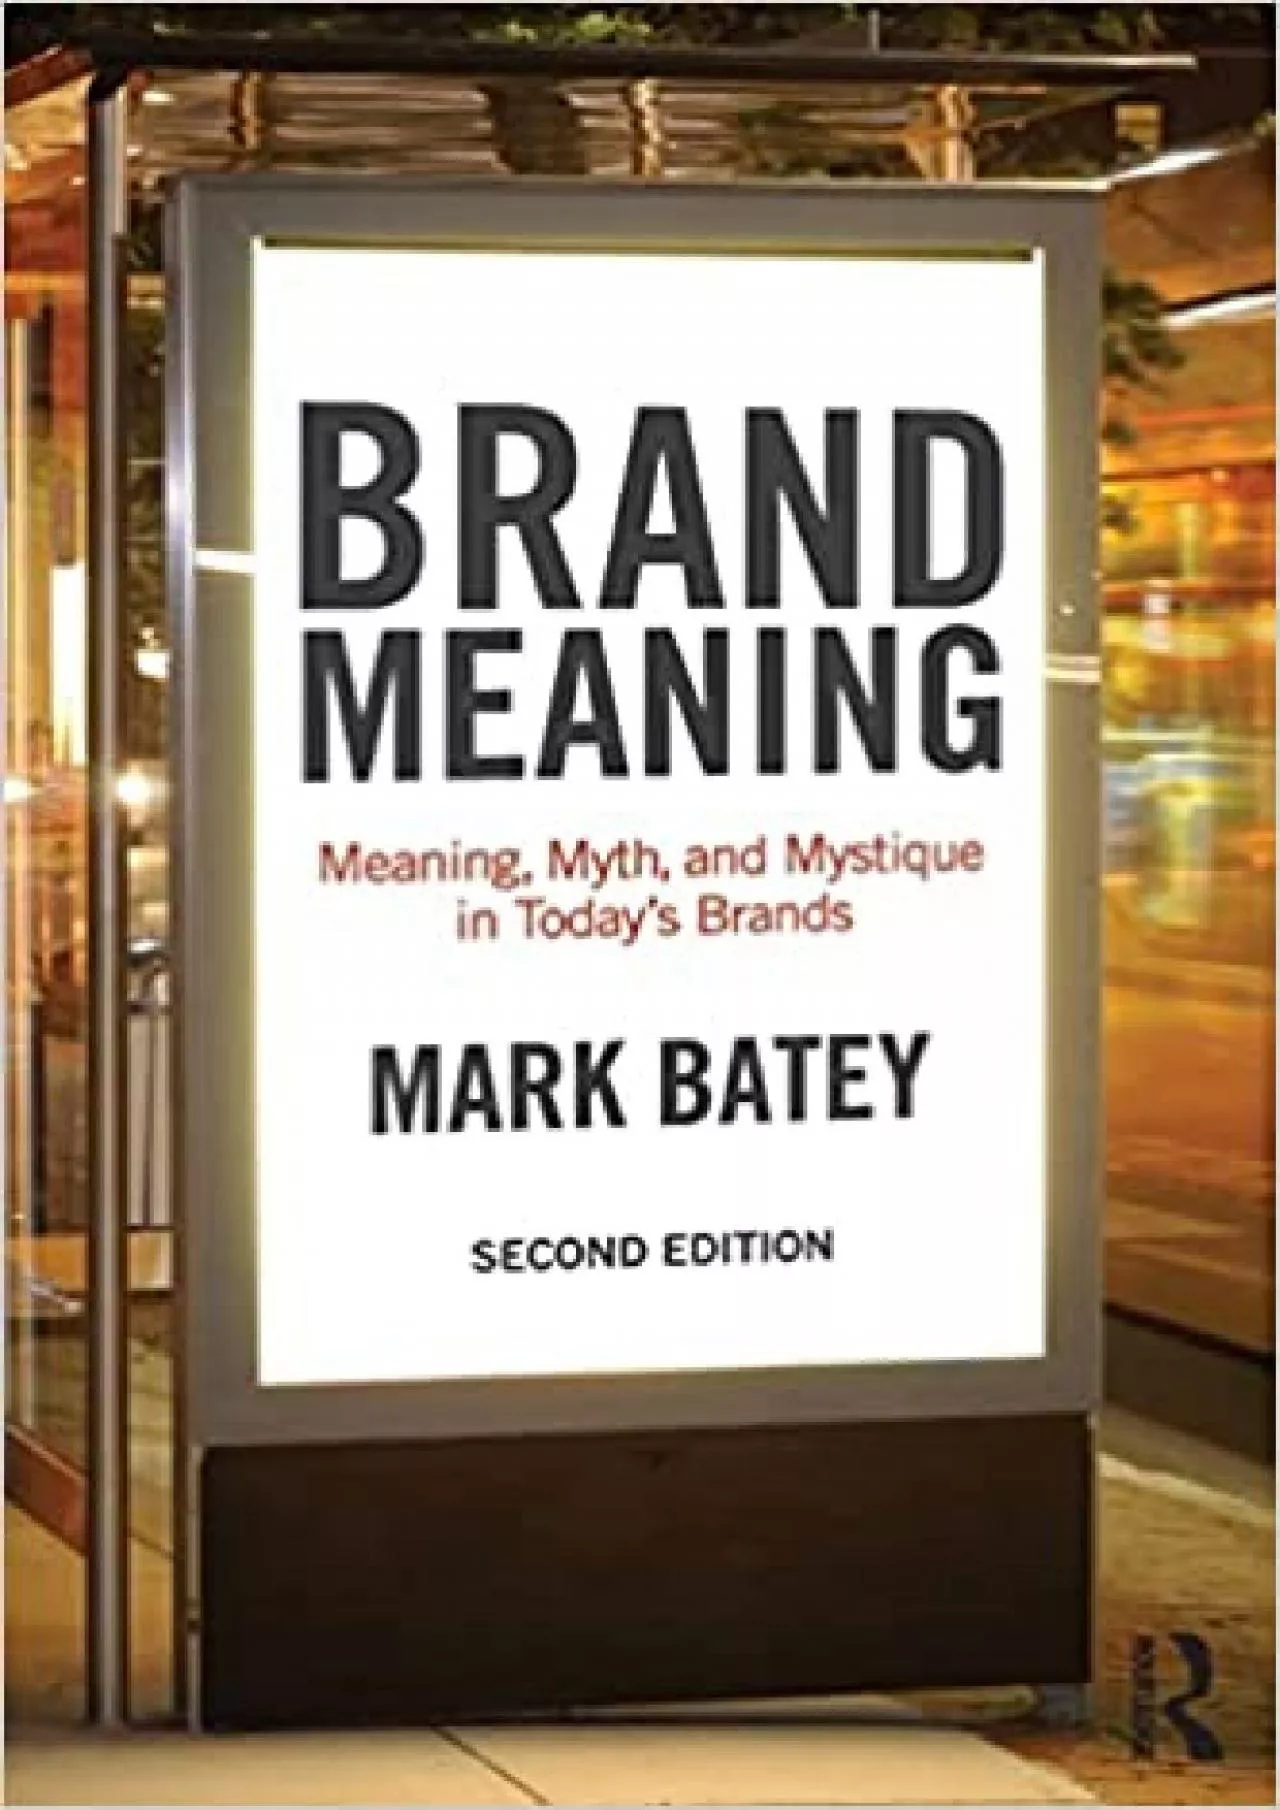 Brand Meaning Meaning, Myth and Mystique in Today’s Brands